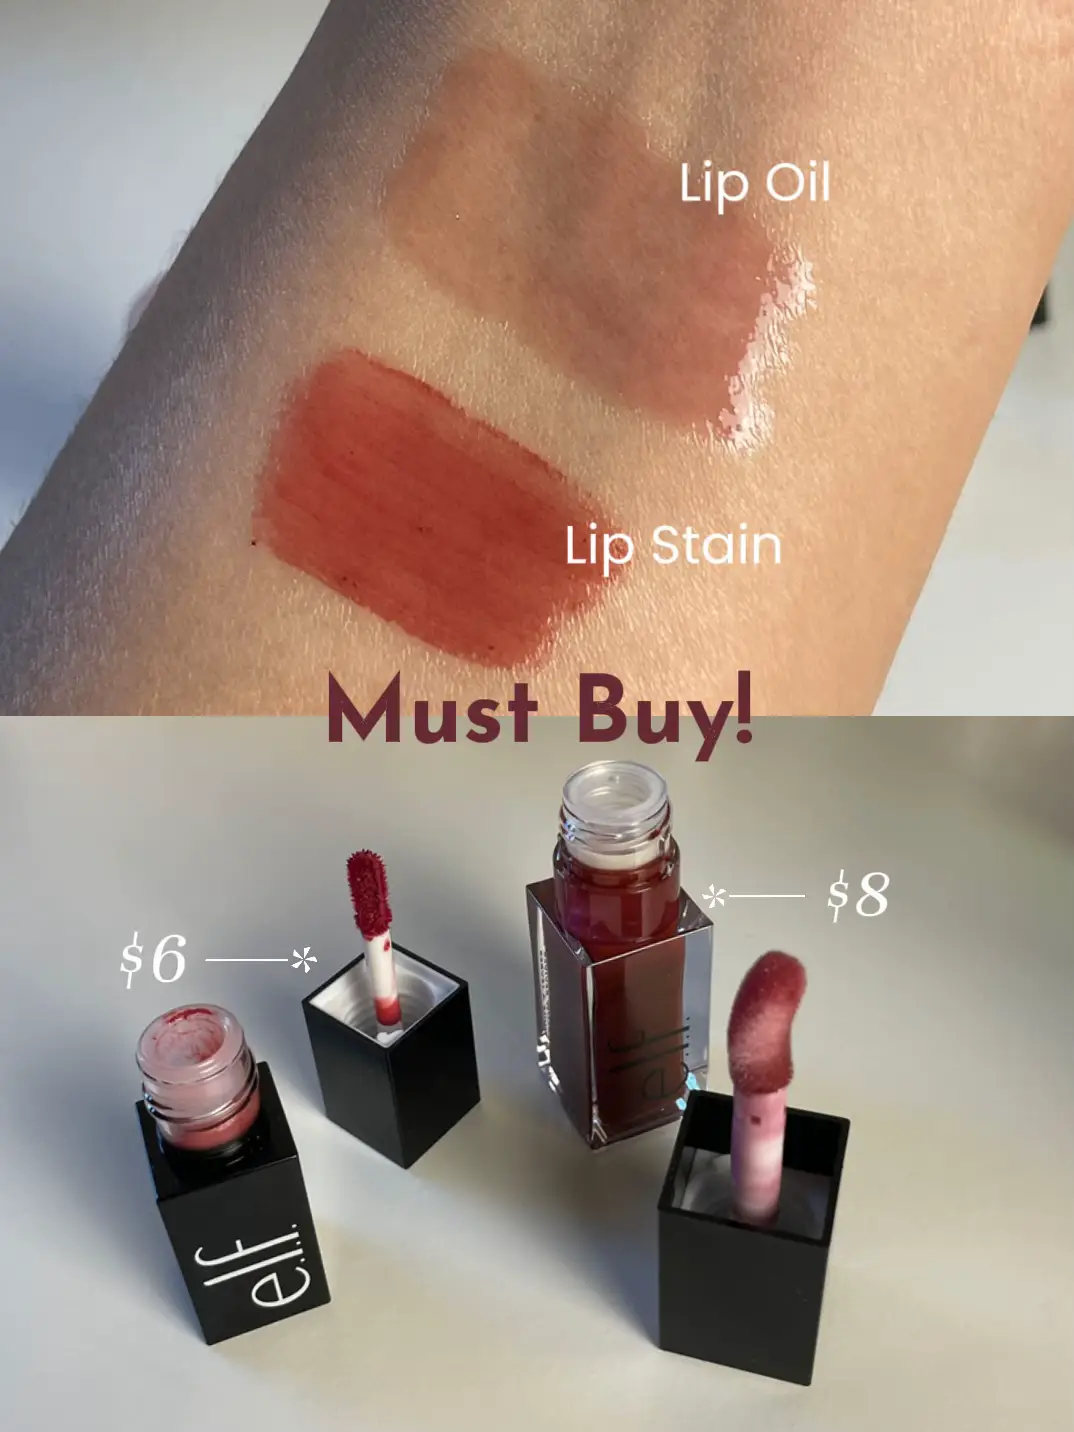 I Tried ELF Cosmetics' New Lip Oil and It's Worth the Hype